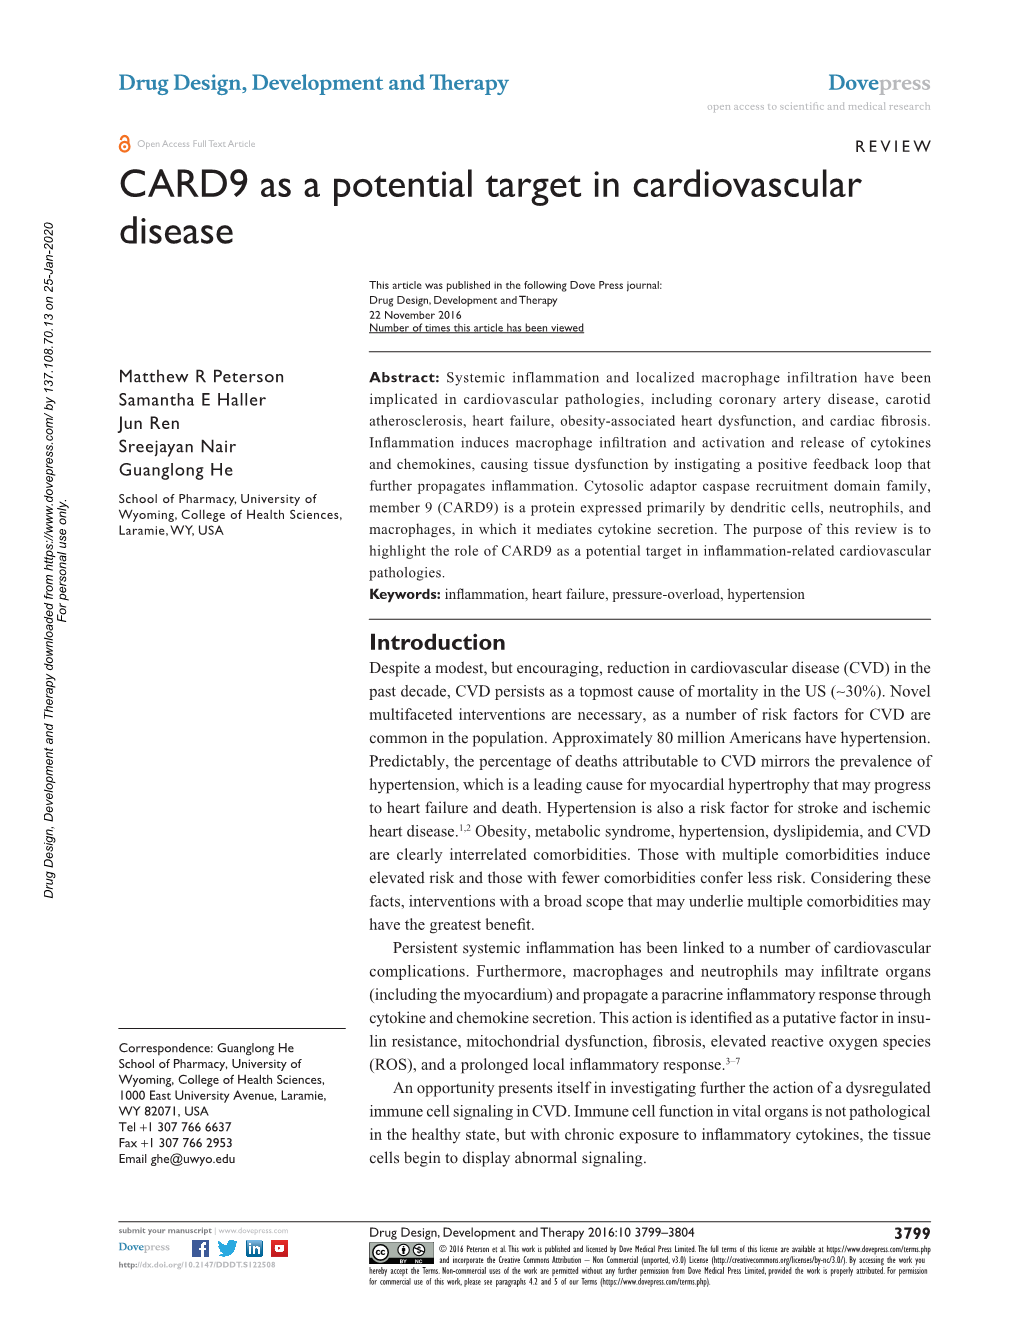 CARD9 As a Potential Target in Cardiovascular Disease